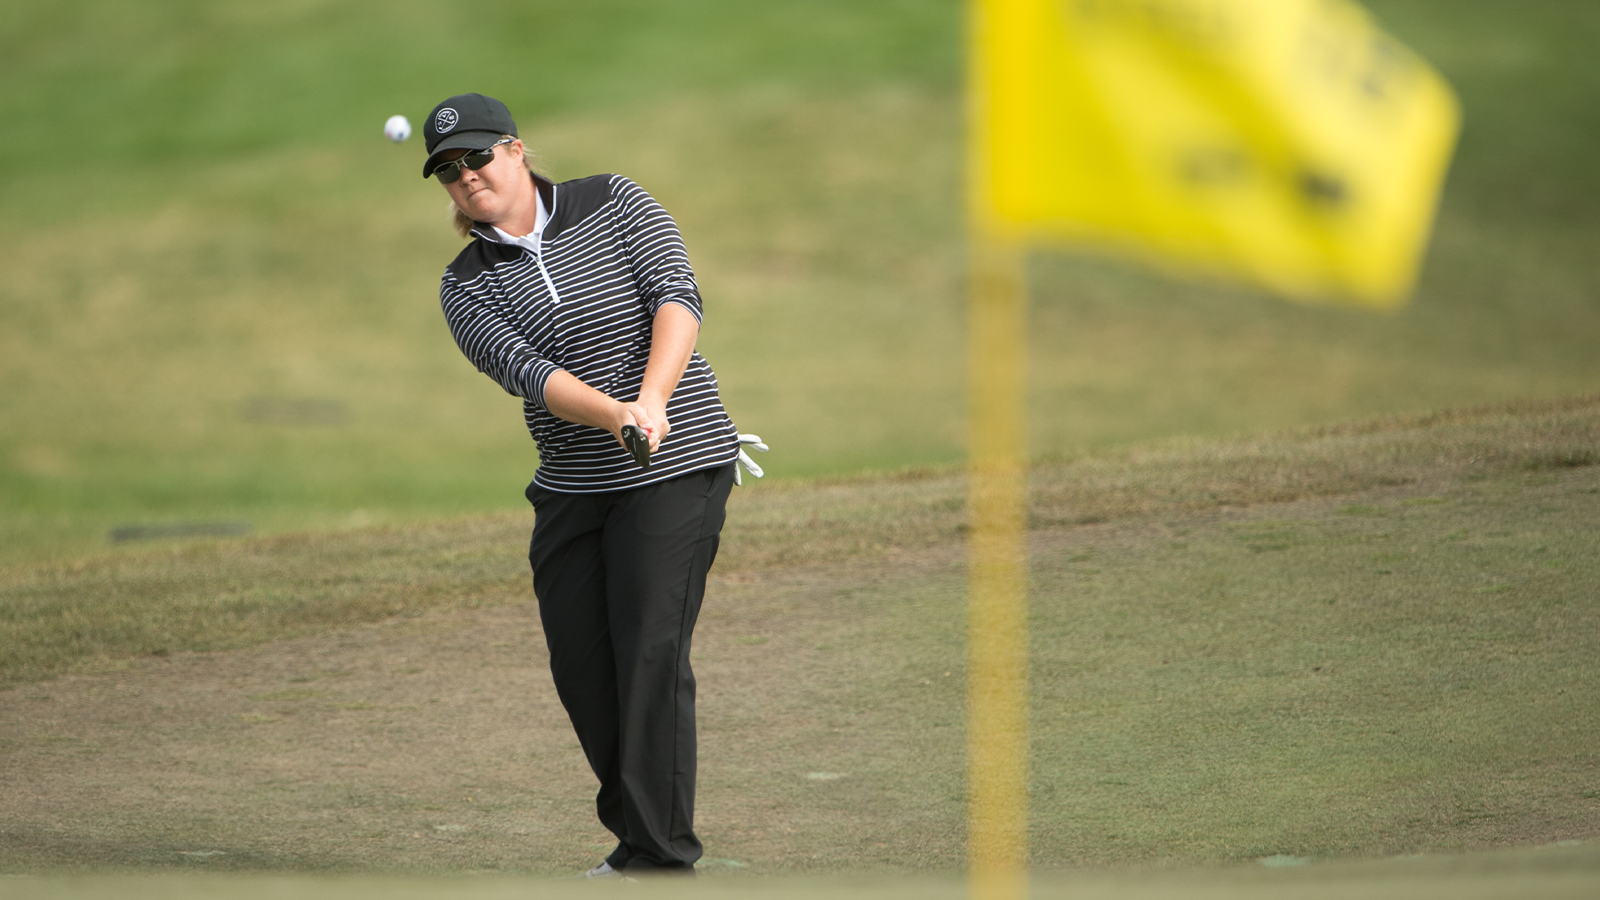 Brittany Kelly chips onto the green on the sixteenth hole during the first round of the 51st PGA Professional Championship held at Bayonet Black Horse on June 17, 2018 in Seaside, California. (Photo by Montana Pritchard/PGA of America)